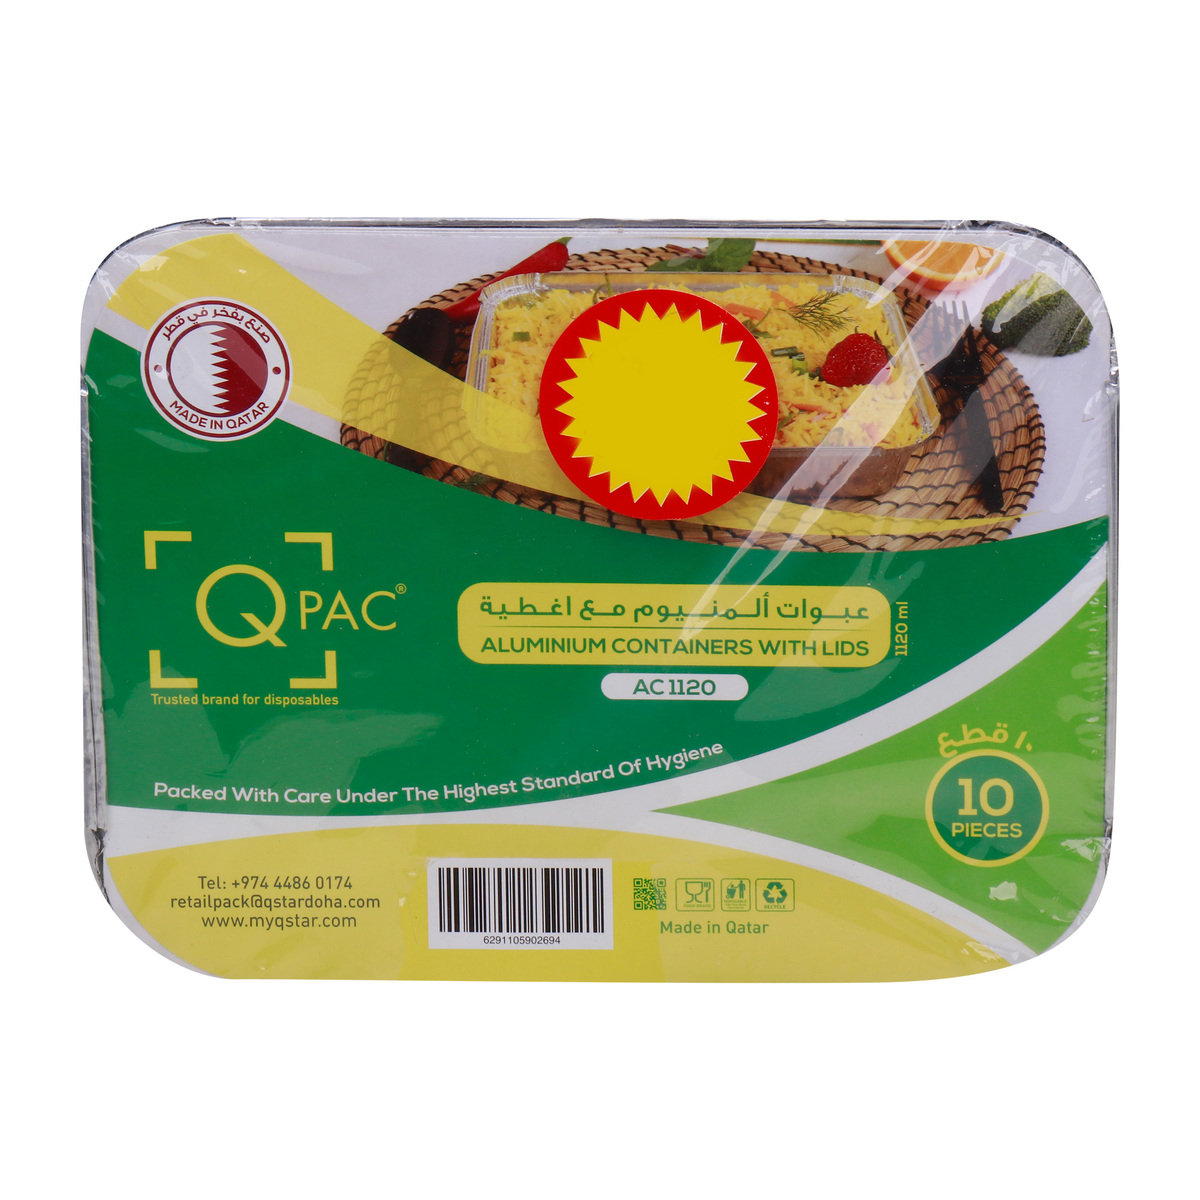 QPac Aluminium Containers with Lids, 1120ml, 3 x 10 Pcs